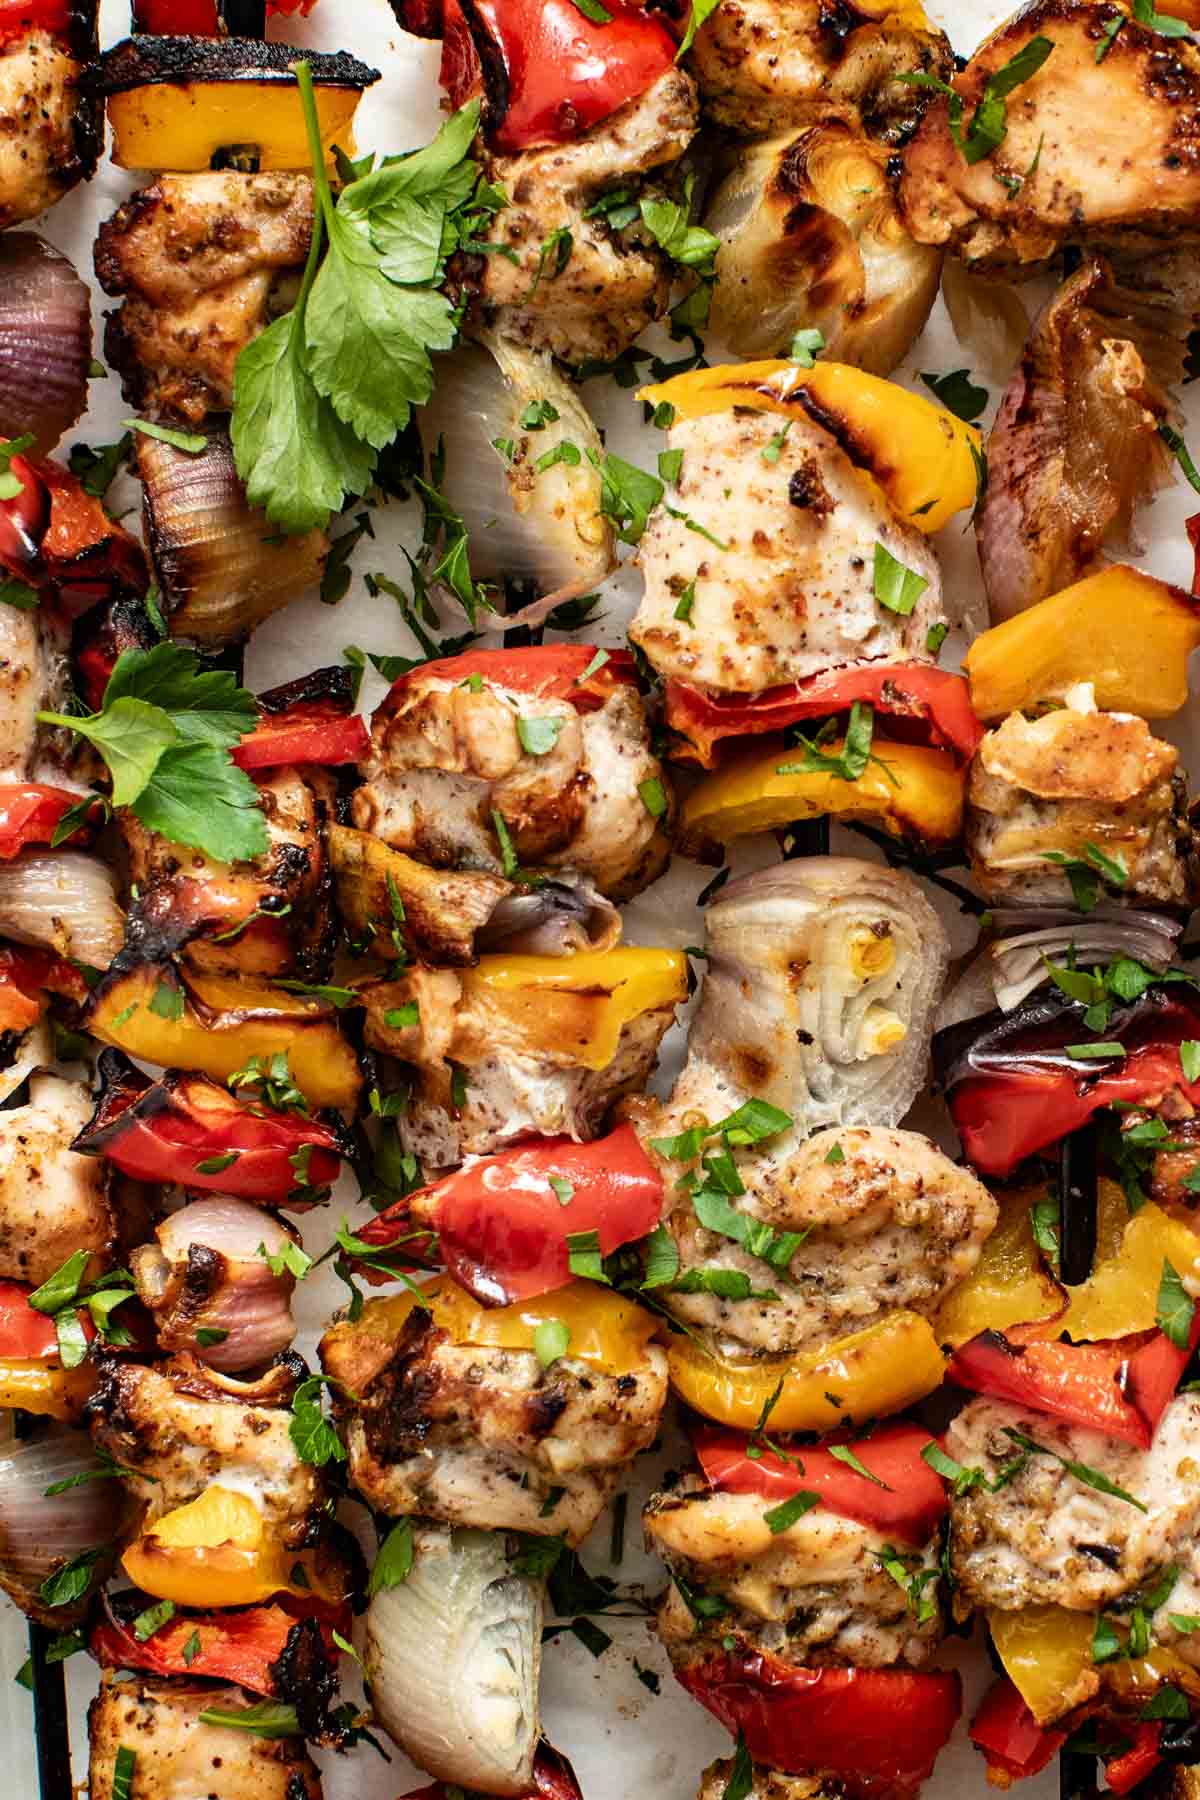 Chicken kabobs that have been baked in the oven till golden brown topped with parsley lined in a row.